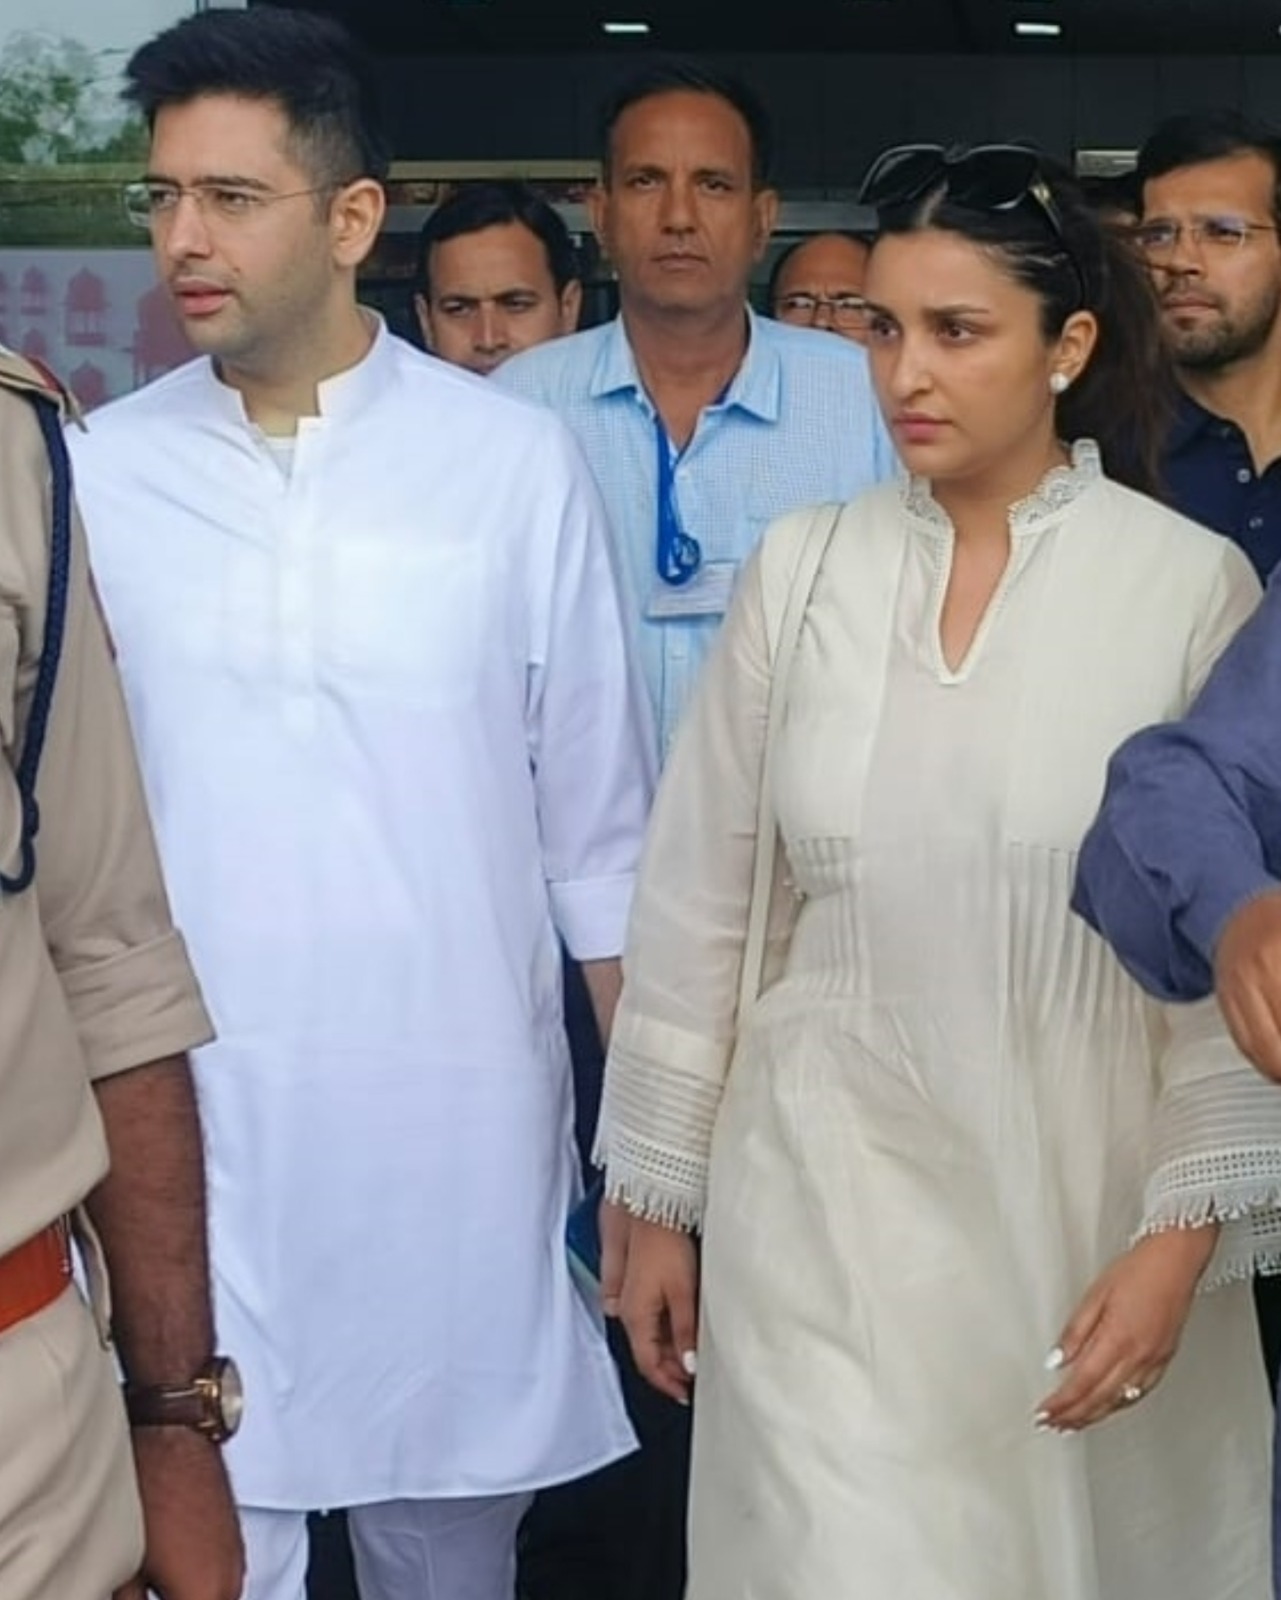 Soon-to-be-married couple spotted at Jaipur for wedding venue recce